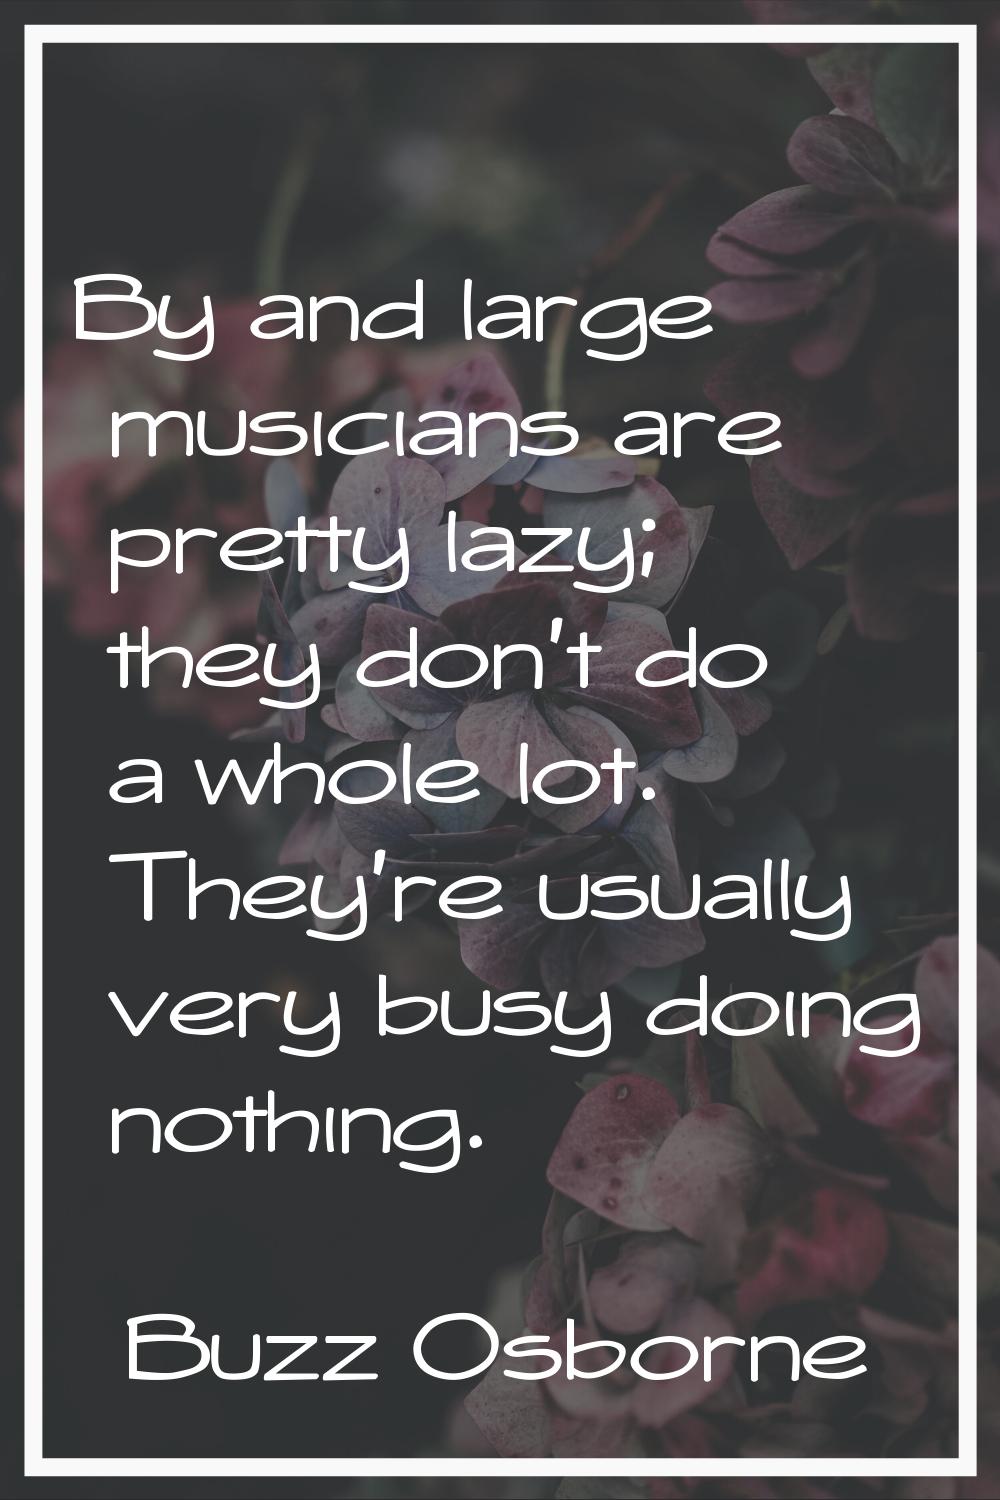 By and large musicians are pretty lazy; they don't do a whole lot. They're usually very busy doing 